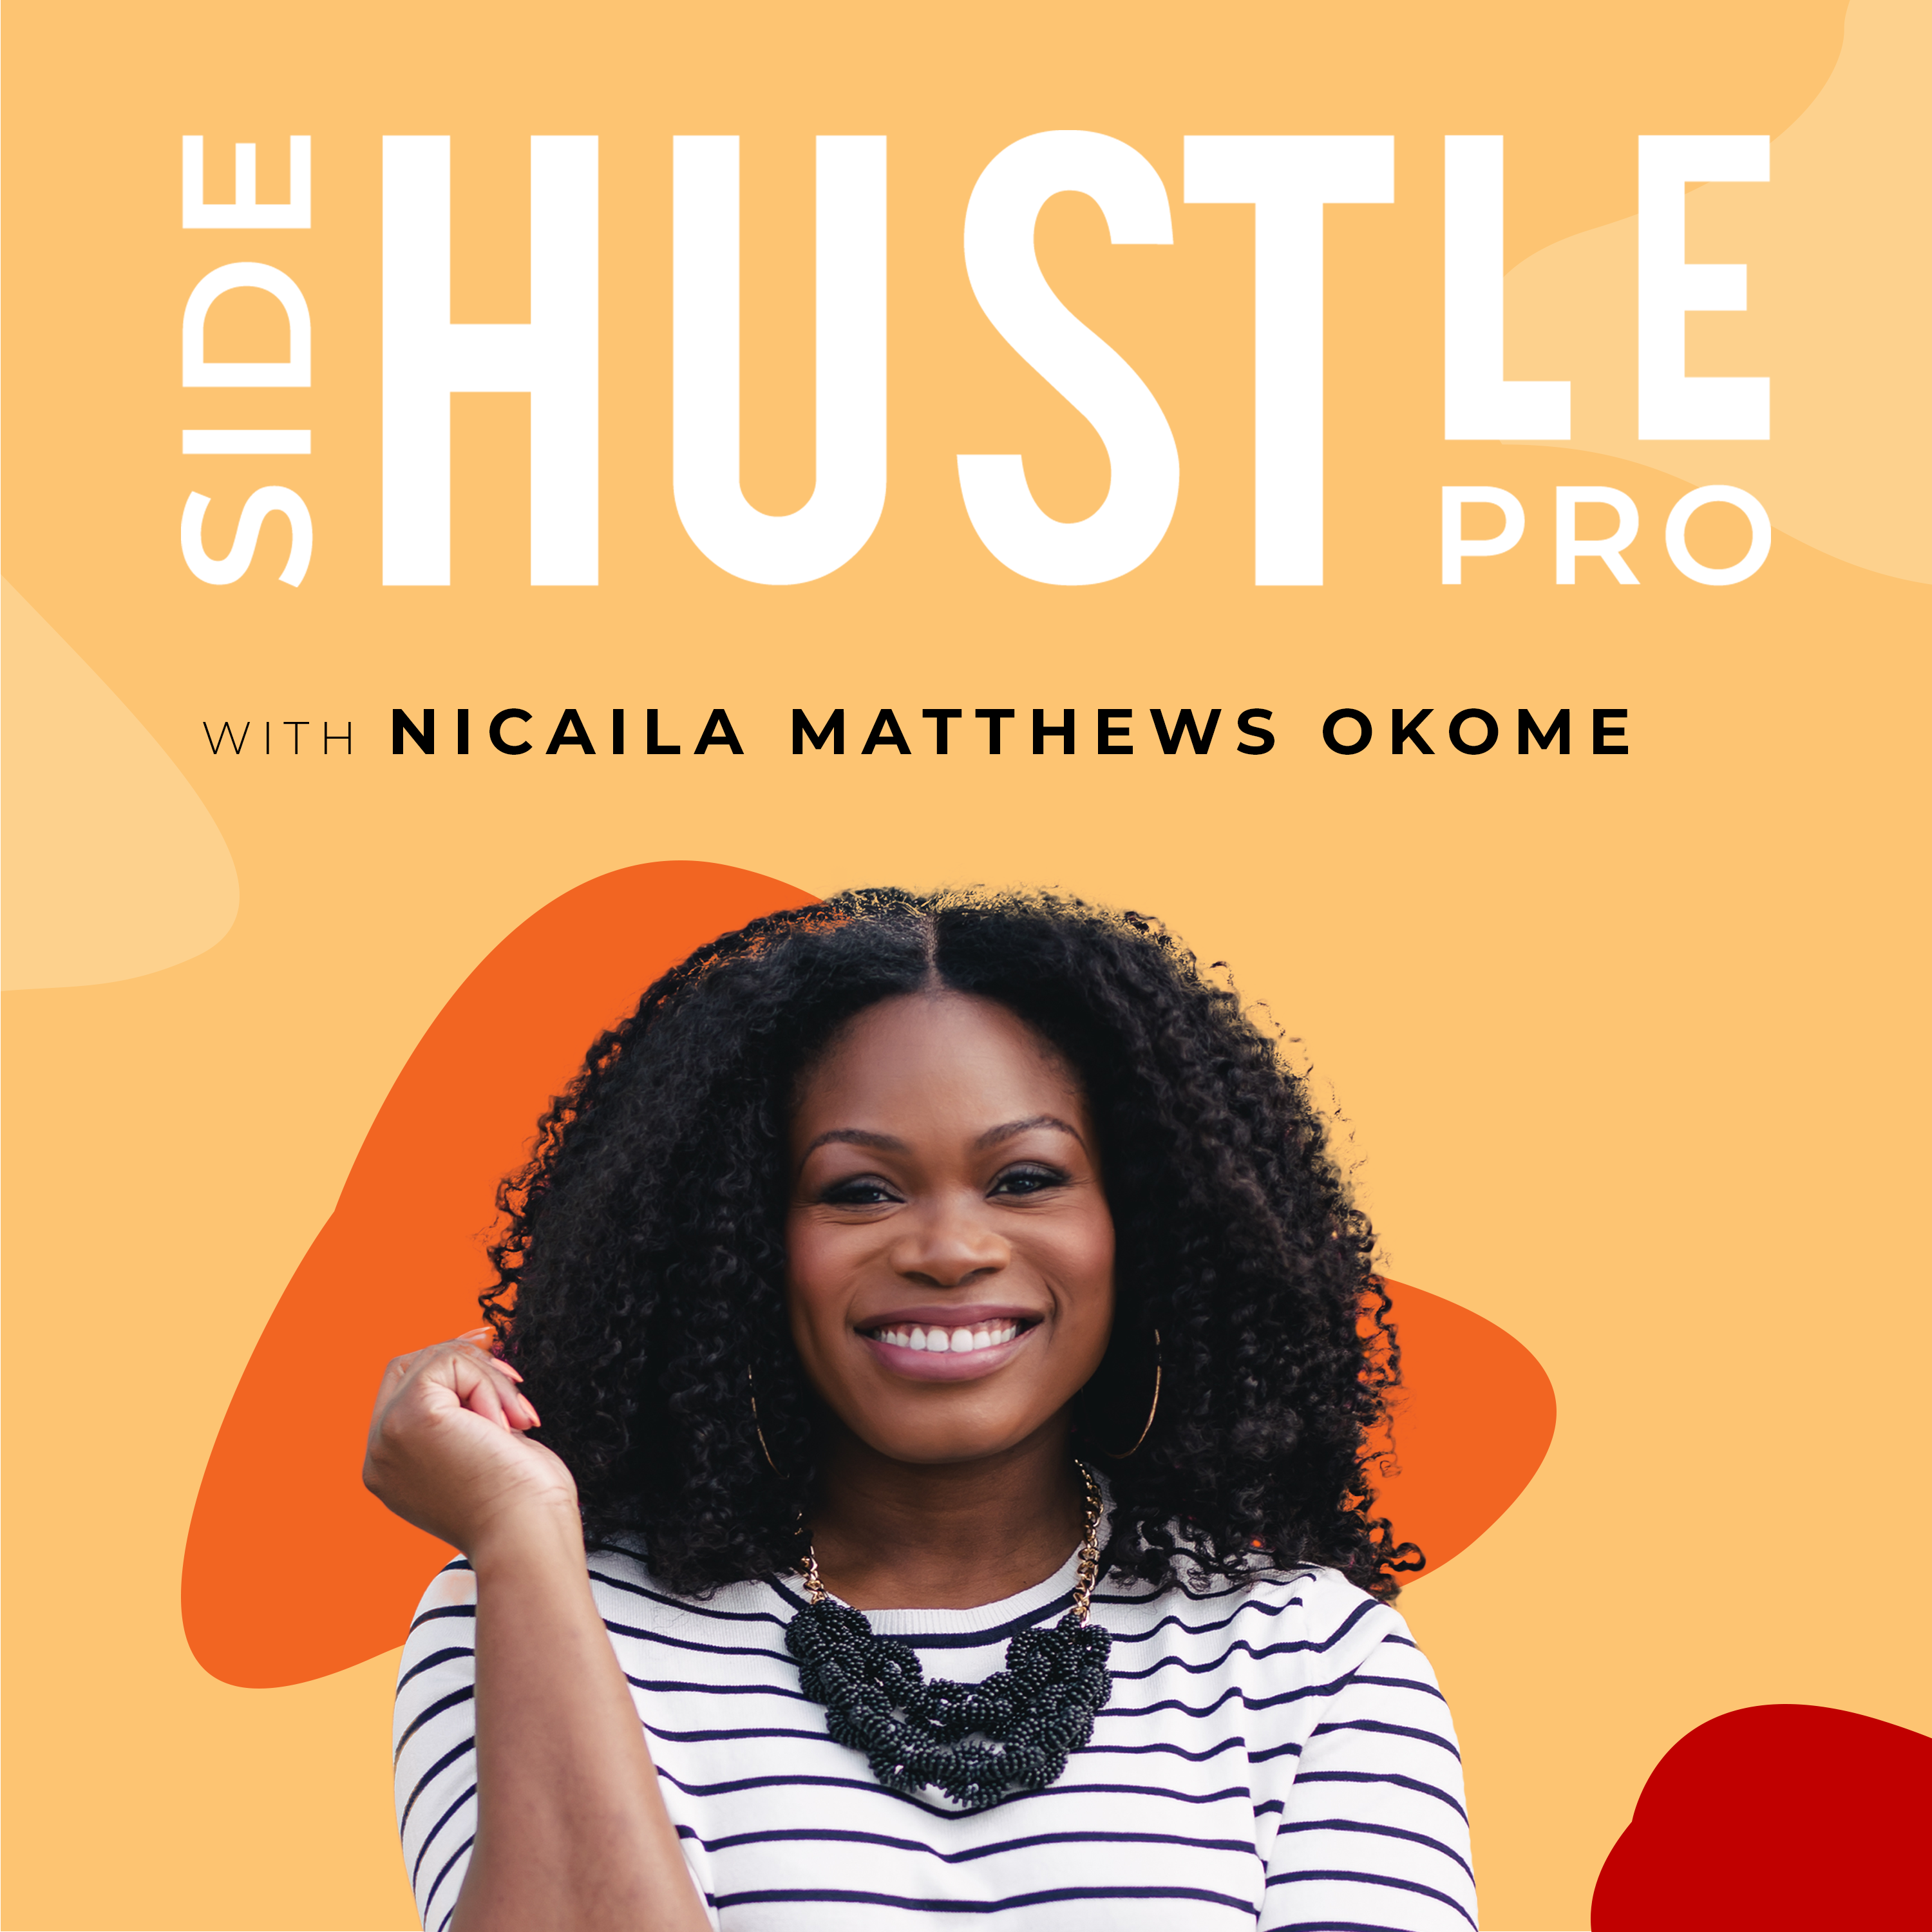 264: Just Do It! Don’t Procrastinate, Start Your Side Hustle This Year REWIND